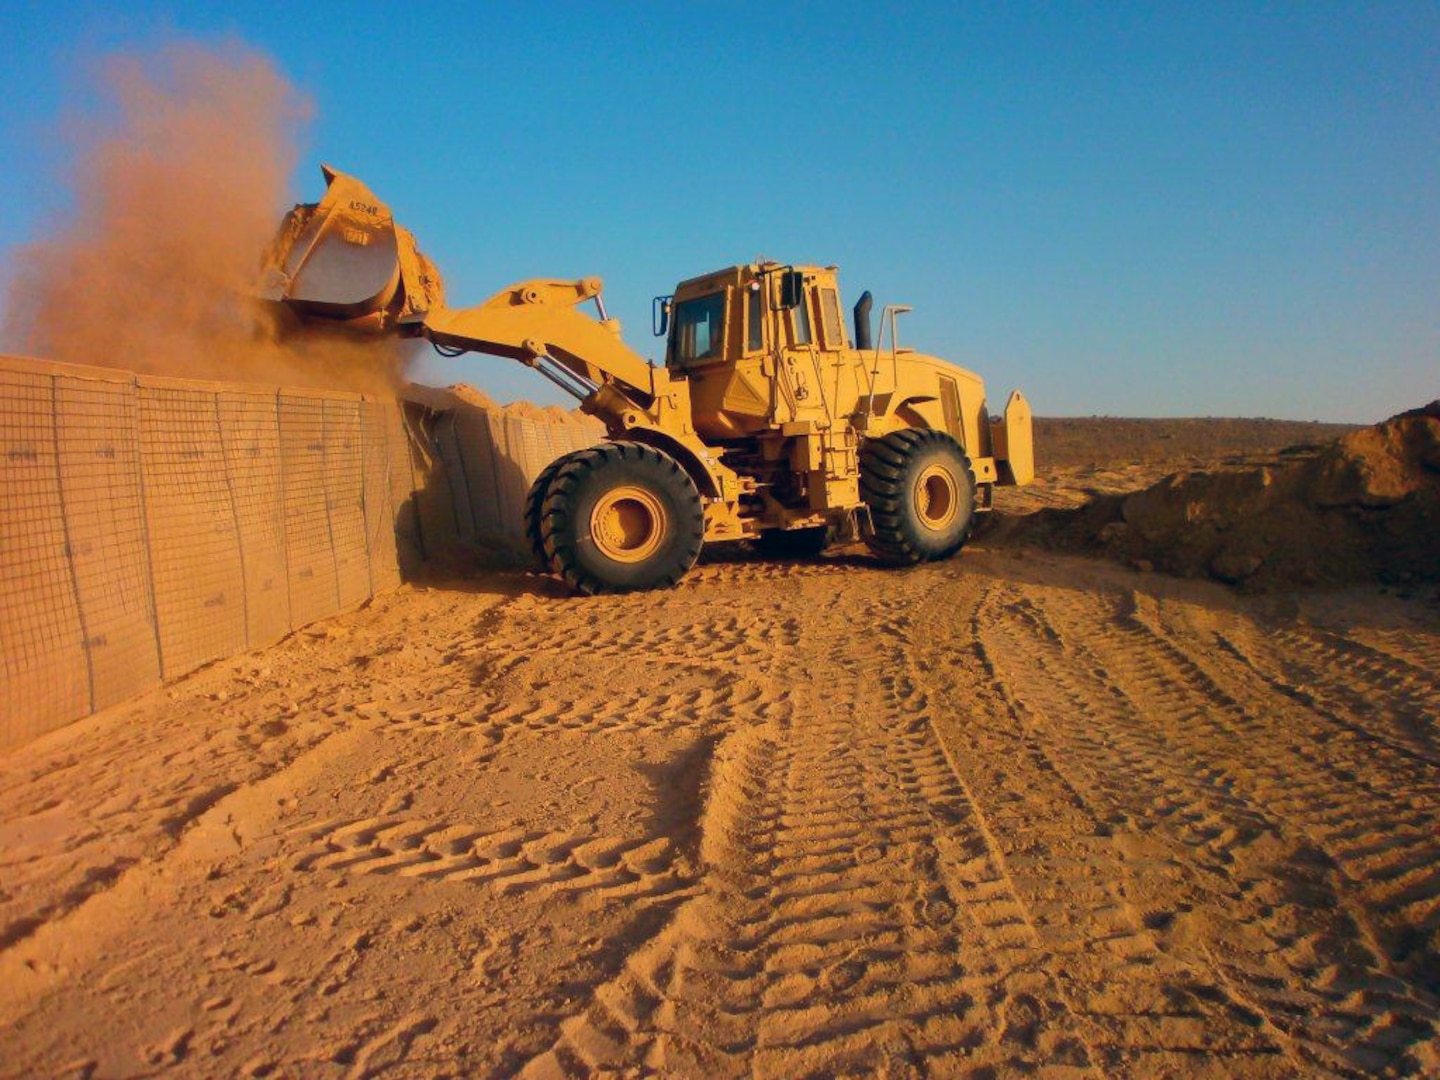 South Dakota Army National Guard Spc. Kyle Griffith of the 842nd Horizontal Construction Company fills barricades at Combat Outpost Giro. Giro was so isolated from the rest of the project sites it had to be resupplied by helicopter.